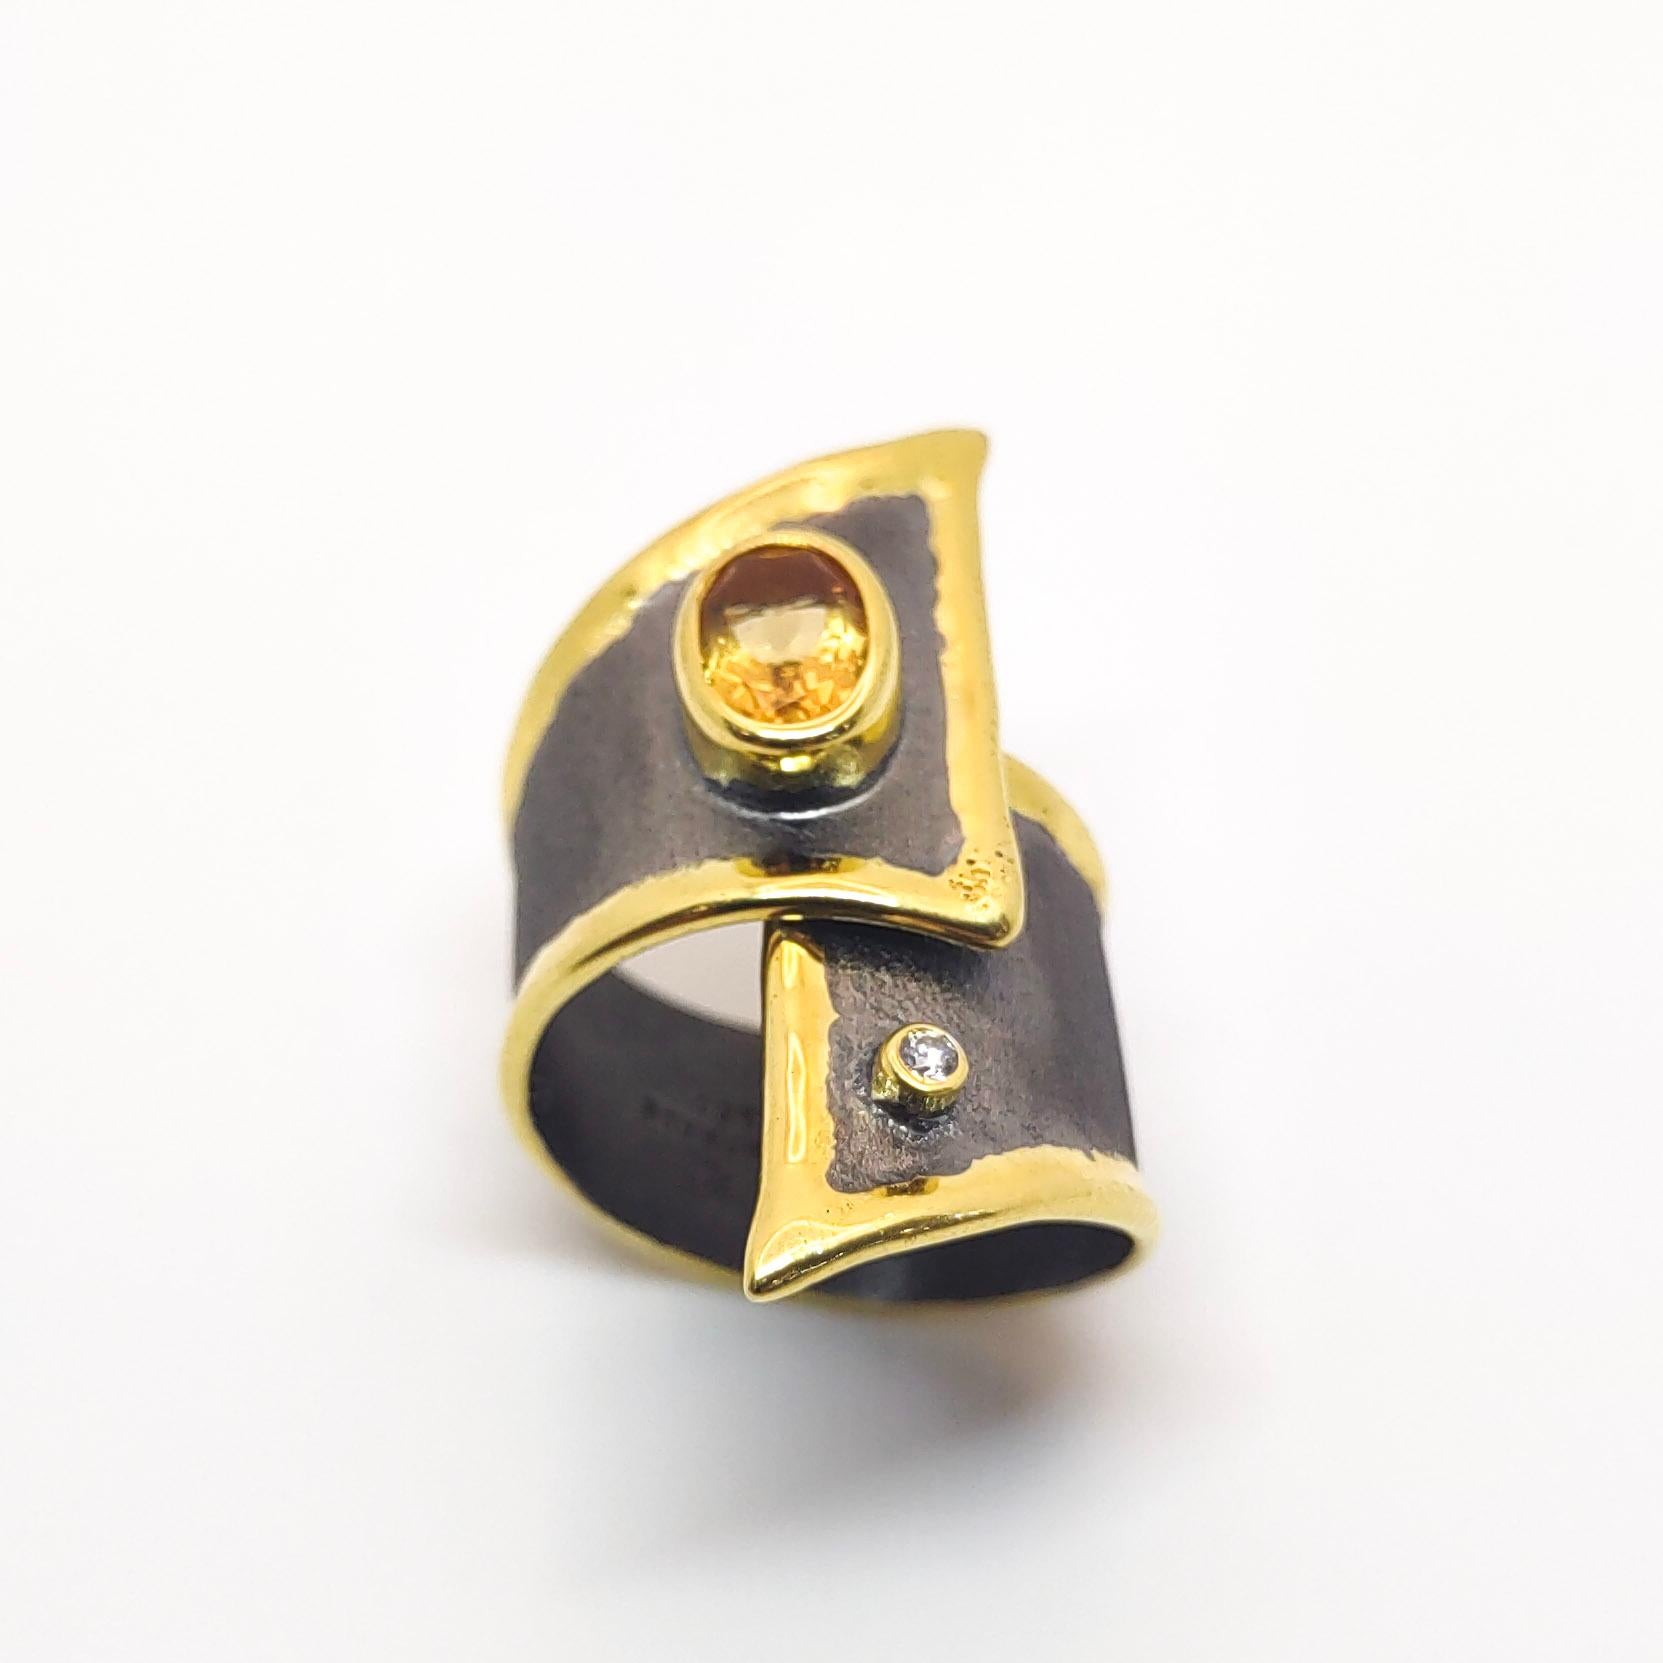 Yianni Creations presents Eclyps Collection handmade artisan ring from fine silver 950 purity plated with black Rhodium. This wide asymmetrical ring features 1.25 Carat Citrine accompanied by 0.03 Carat White Diamond on mat brushed texture and shiny